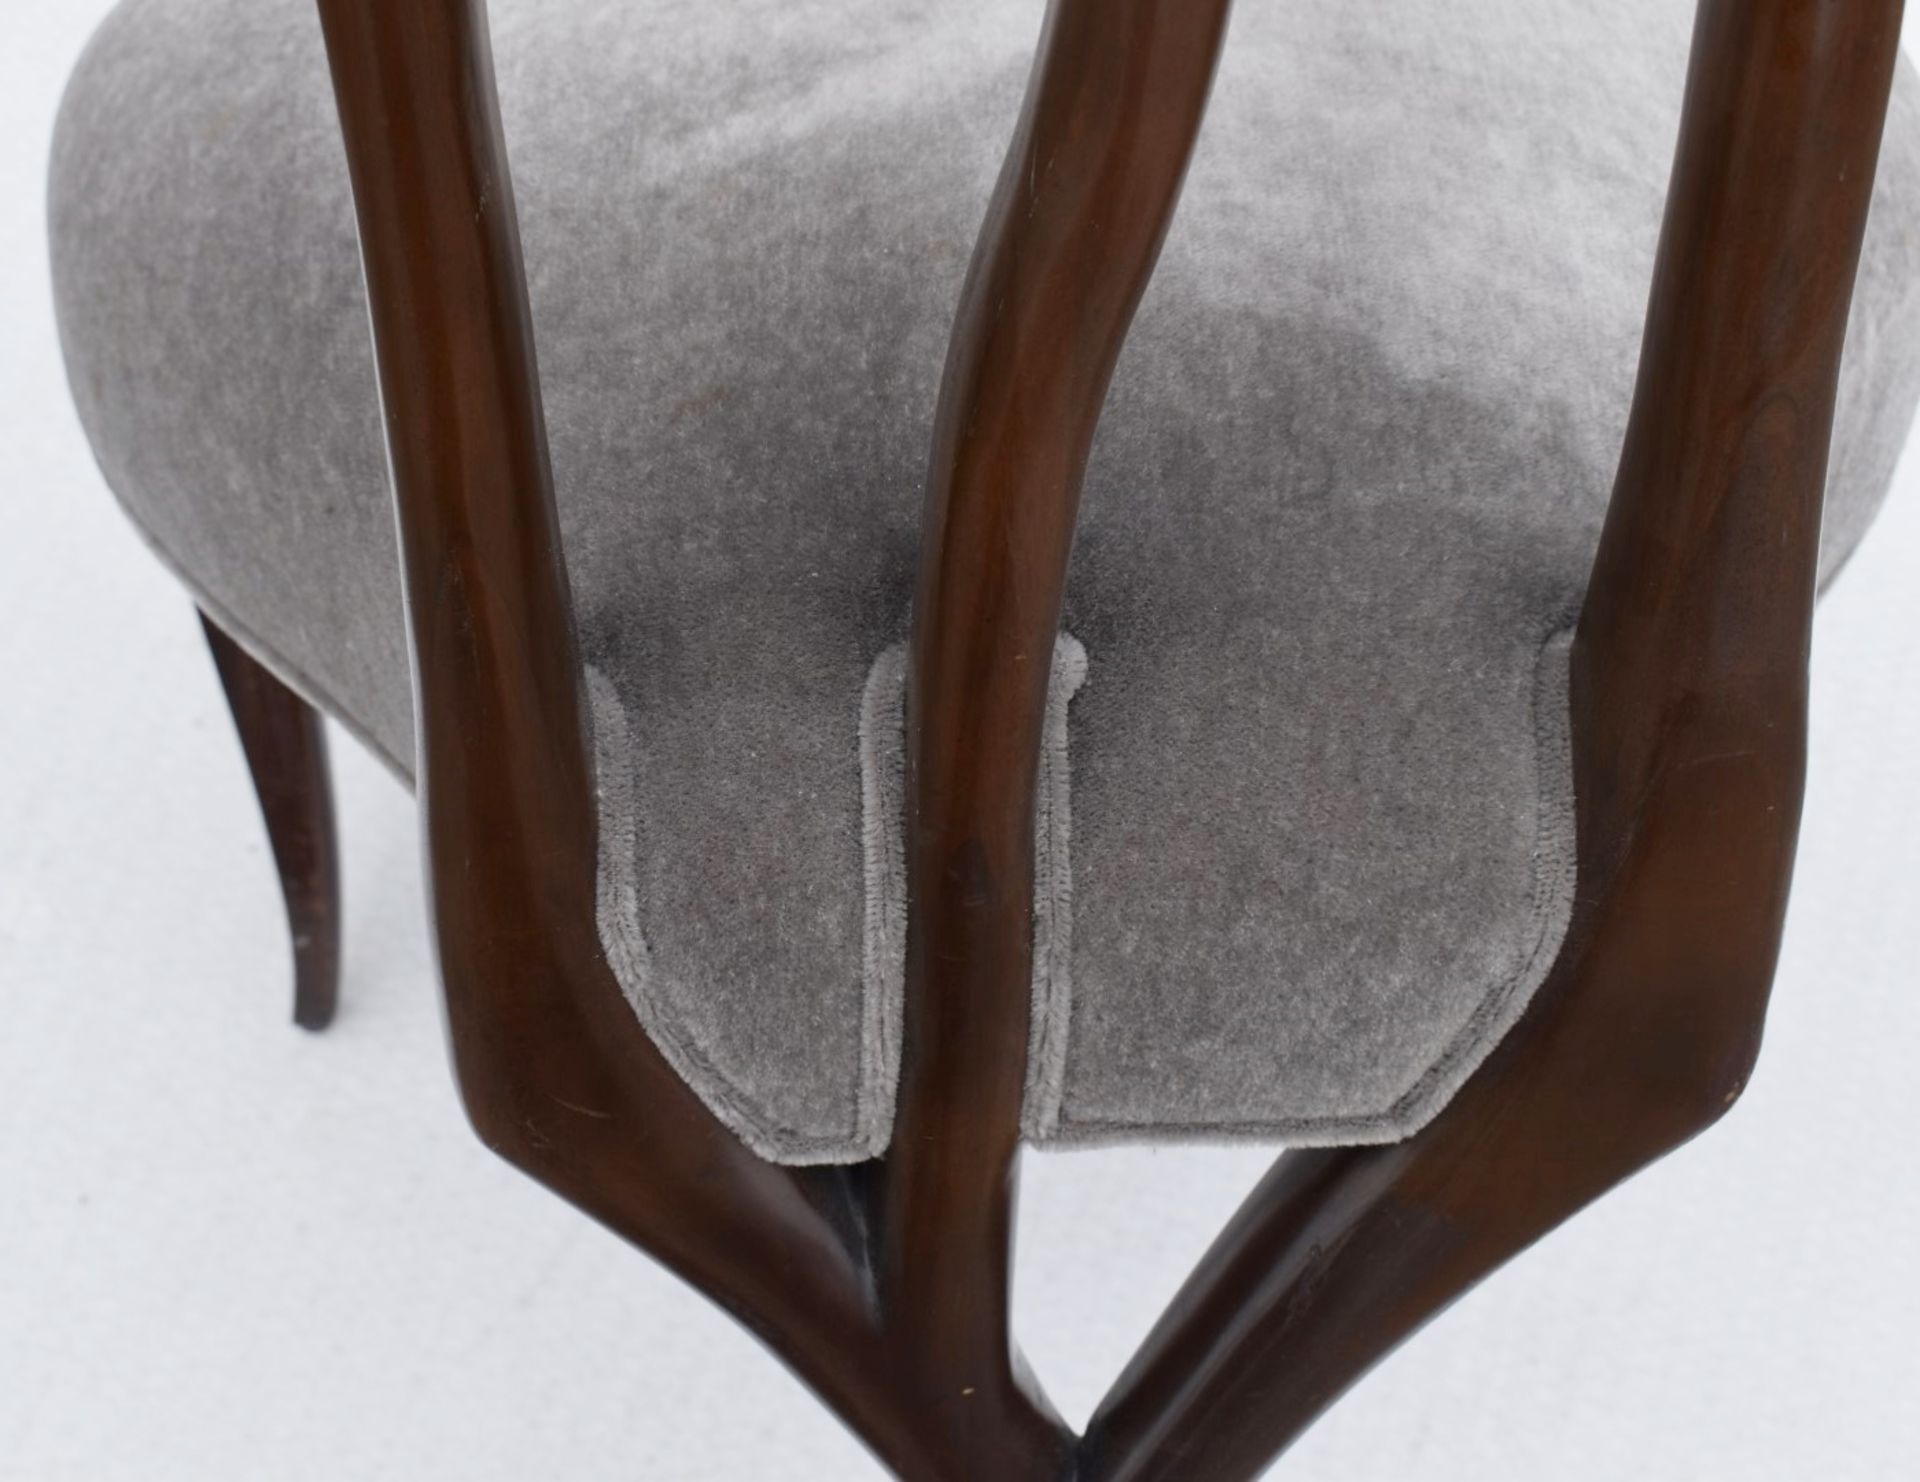 1 x CHRISTOPHER GUY 'Le Jardin' Luxury Hand-carved Solid Mahogany Designer Dining Chair - Recently - Image 10 of 11